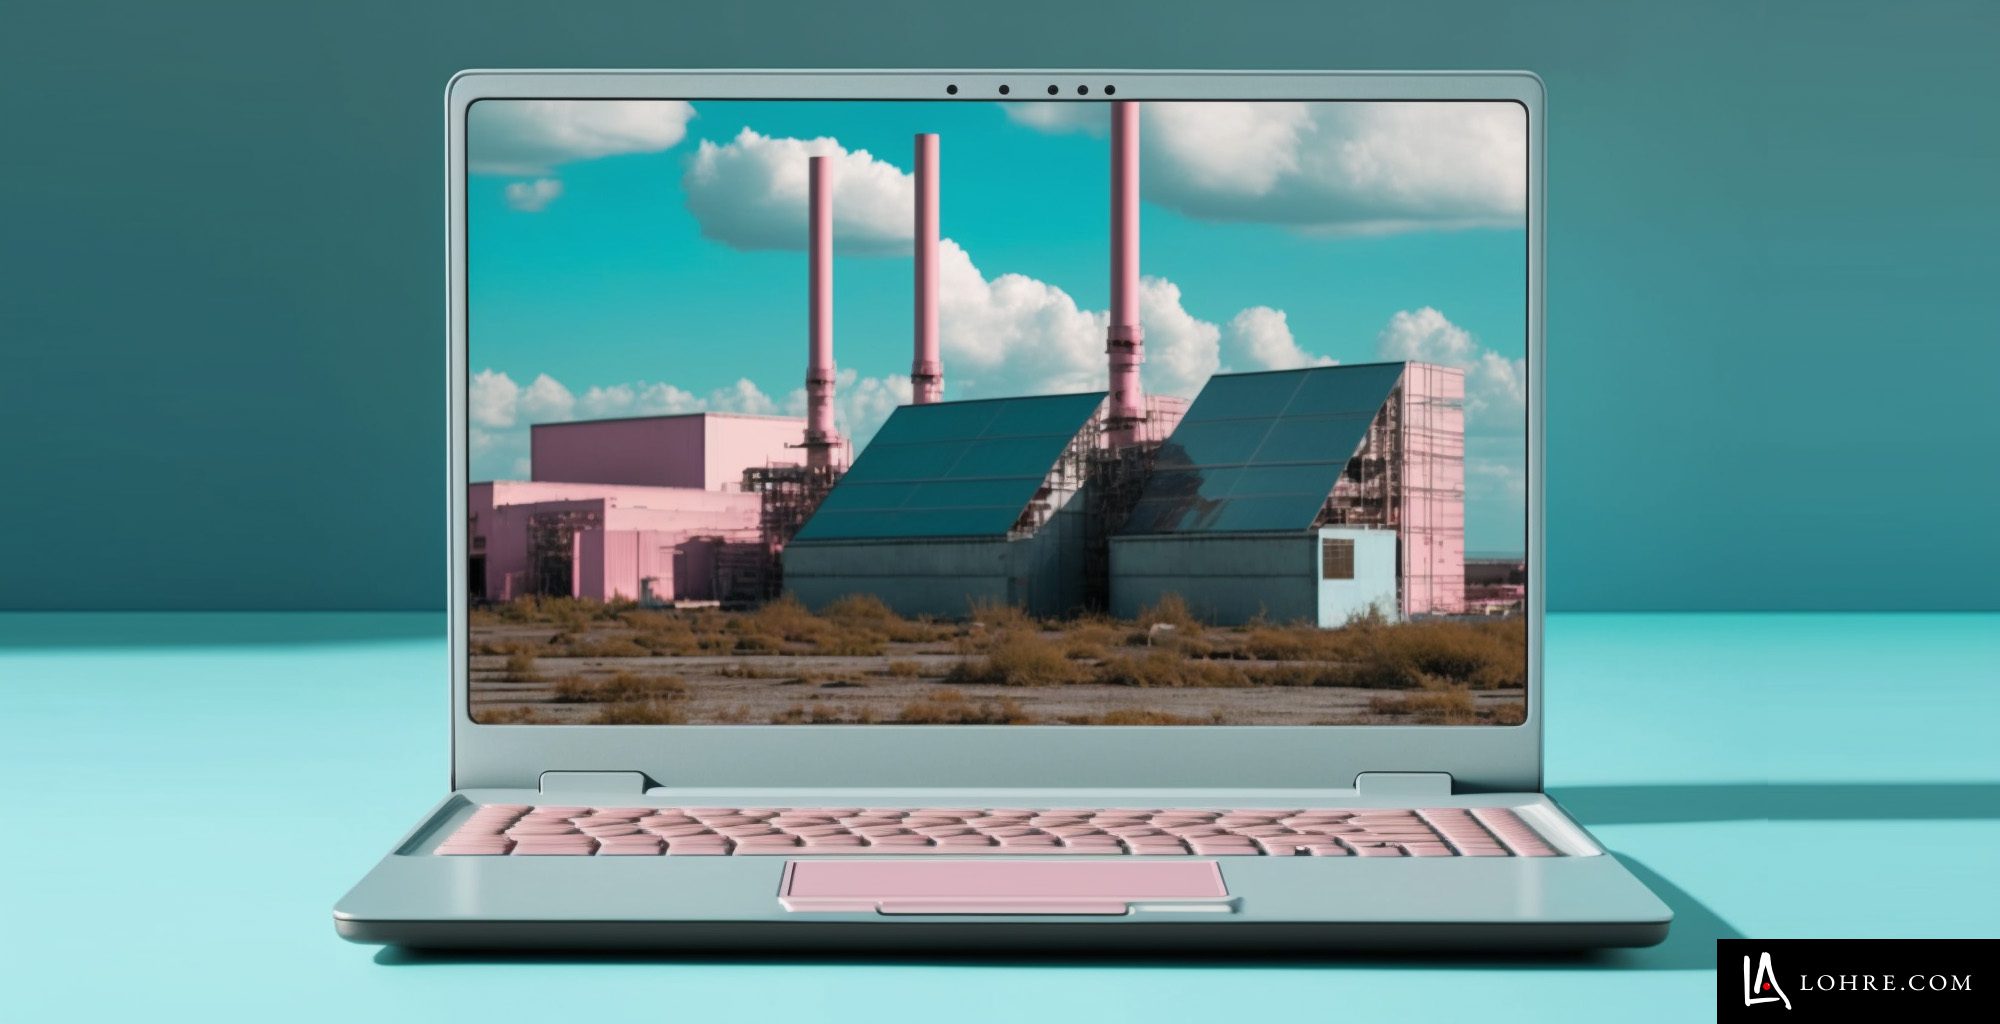 Industrial Search Engine Optimization (SEO) shows laptop with industrial business on screen